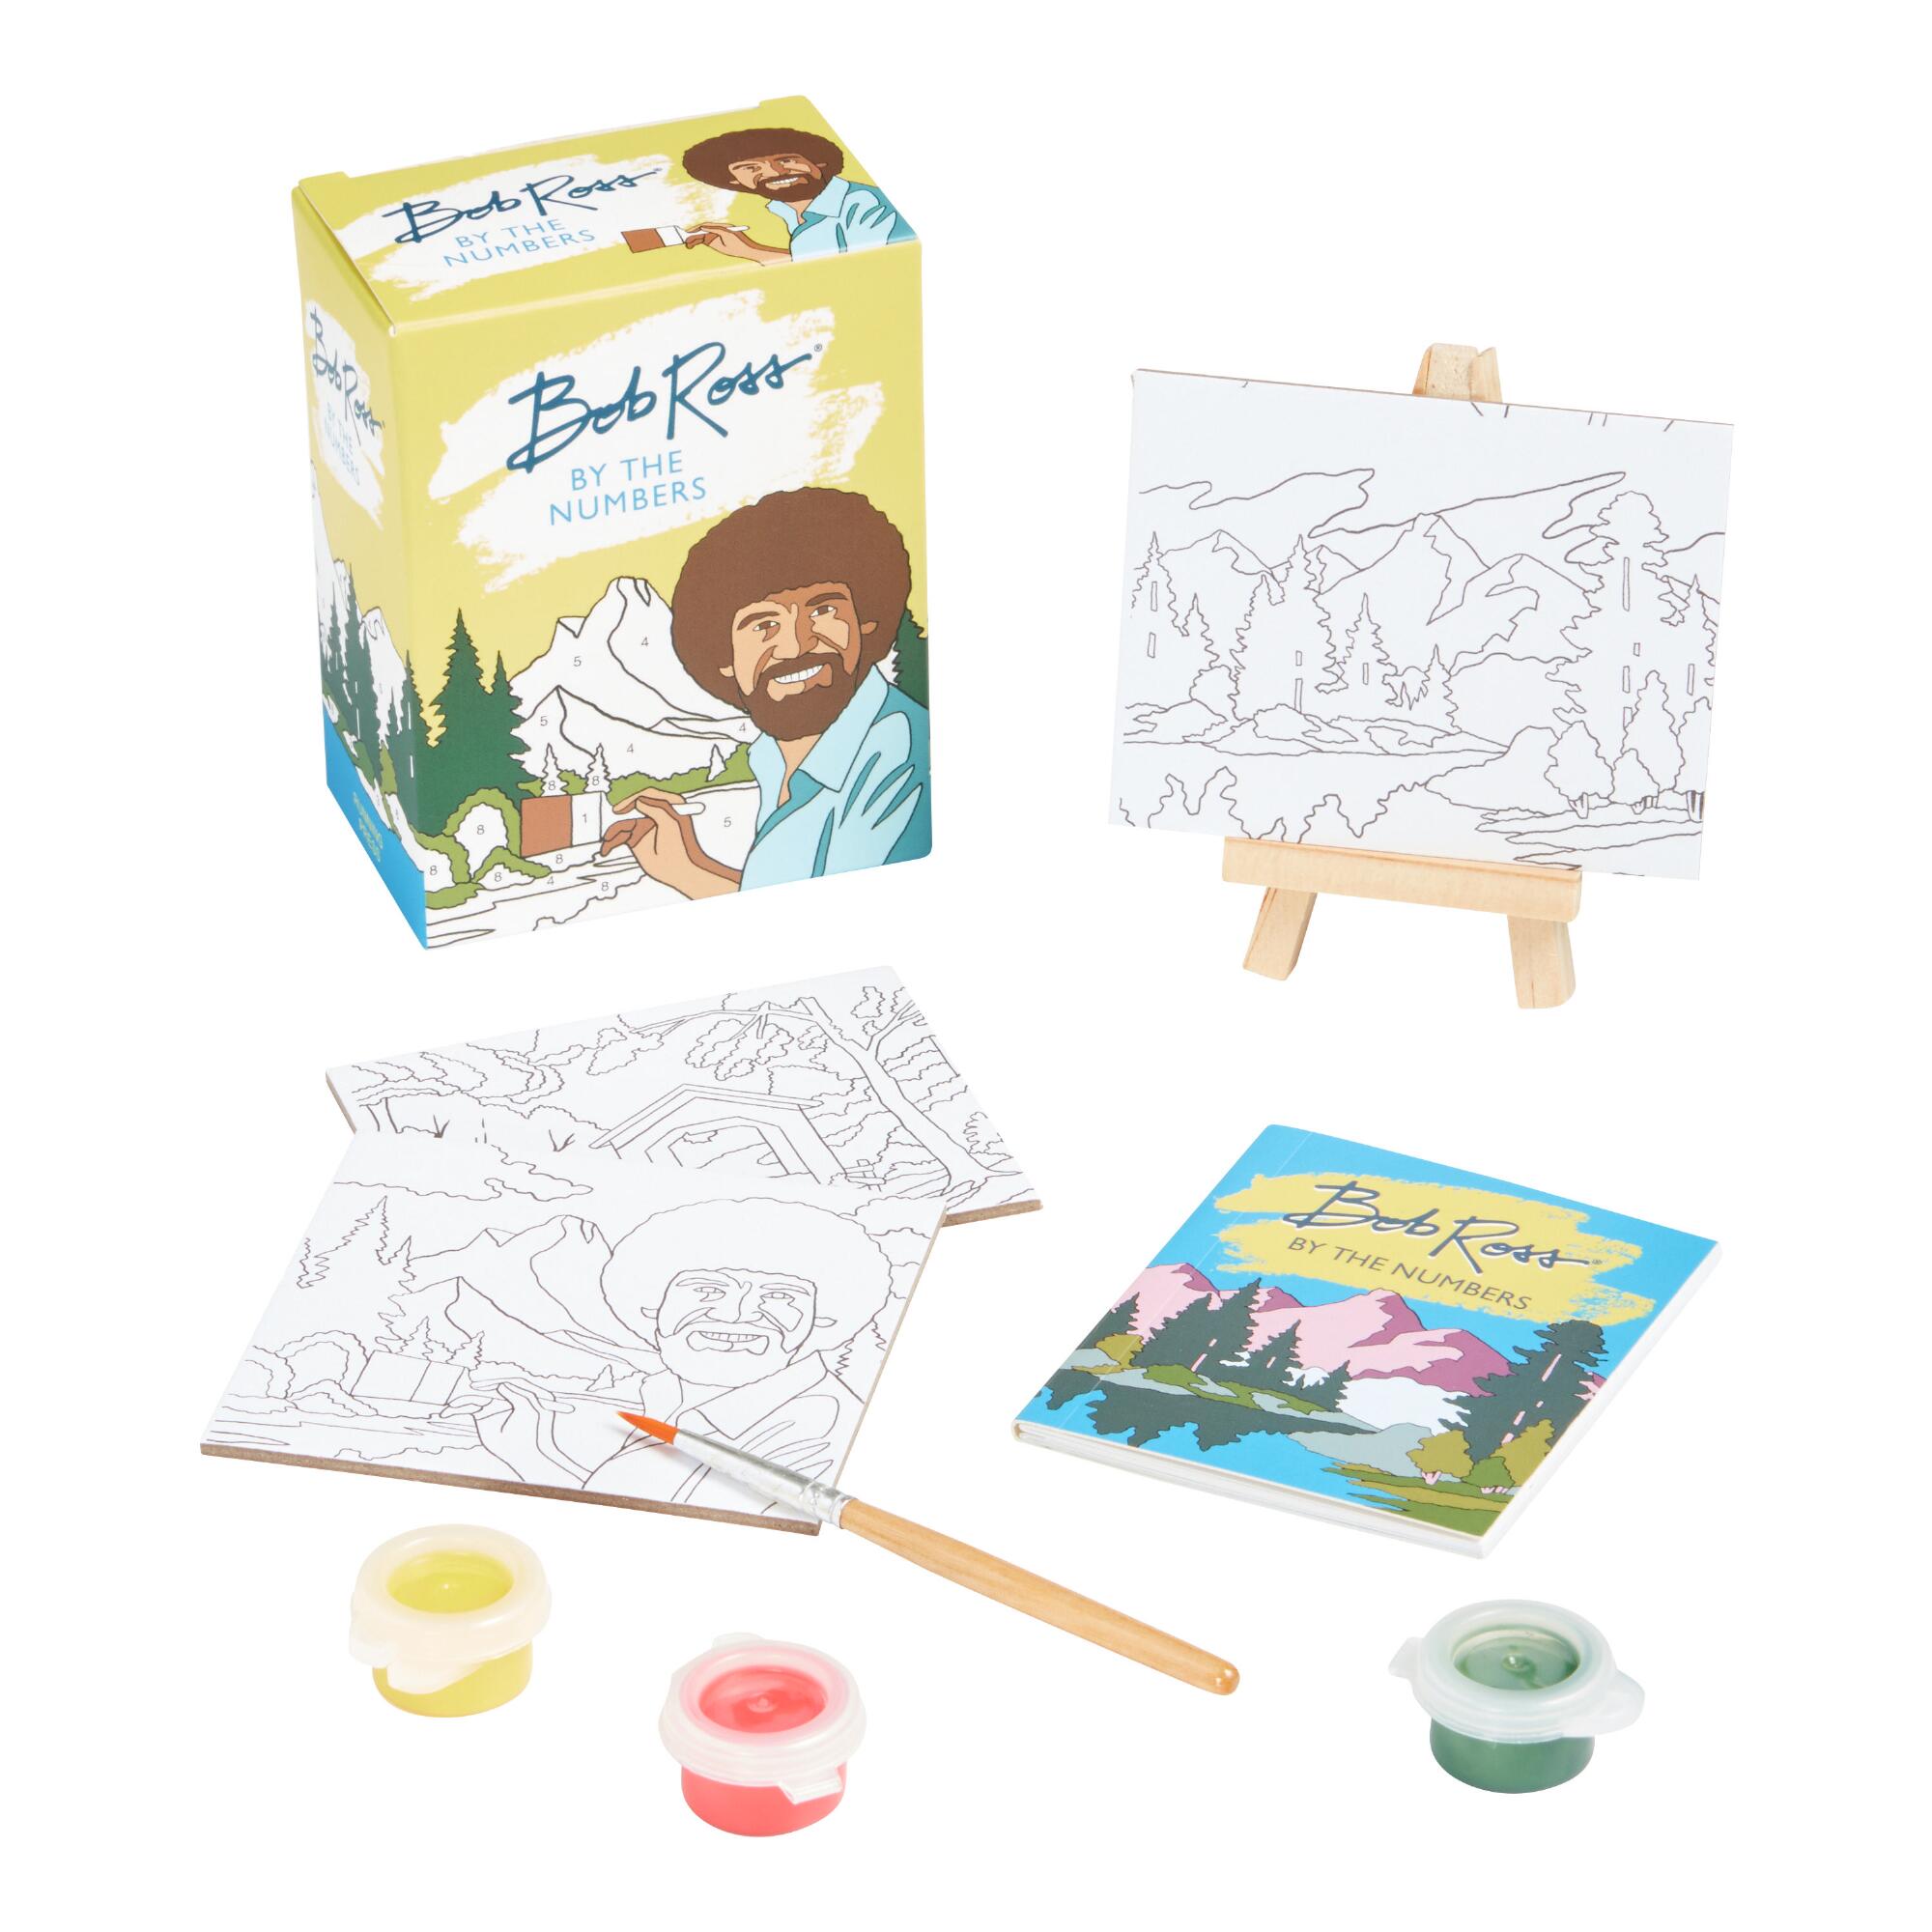 Bob Ross by the Numbers Mini Painting Set: Multi by World Market